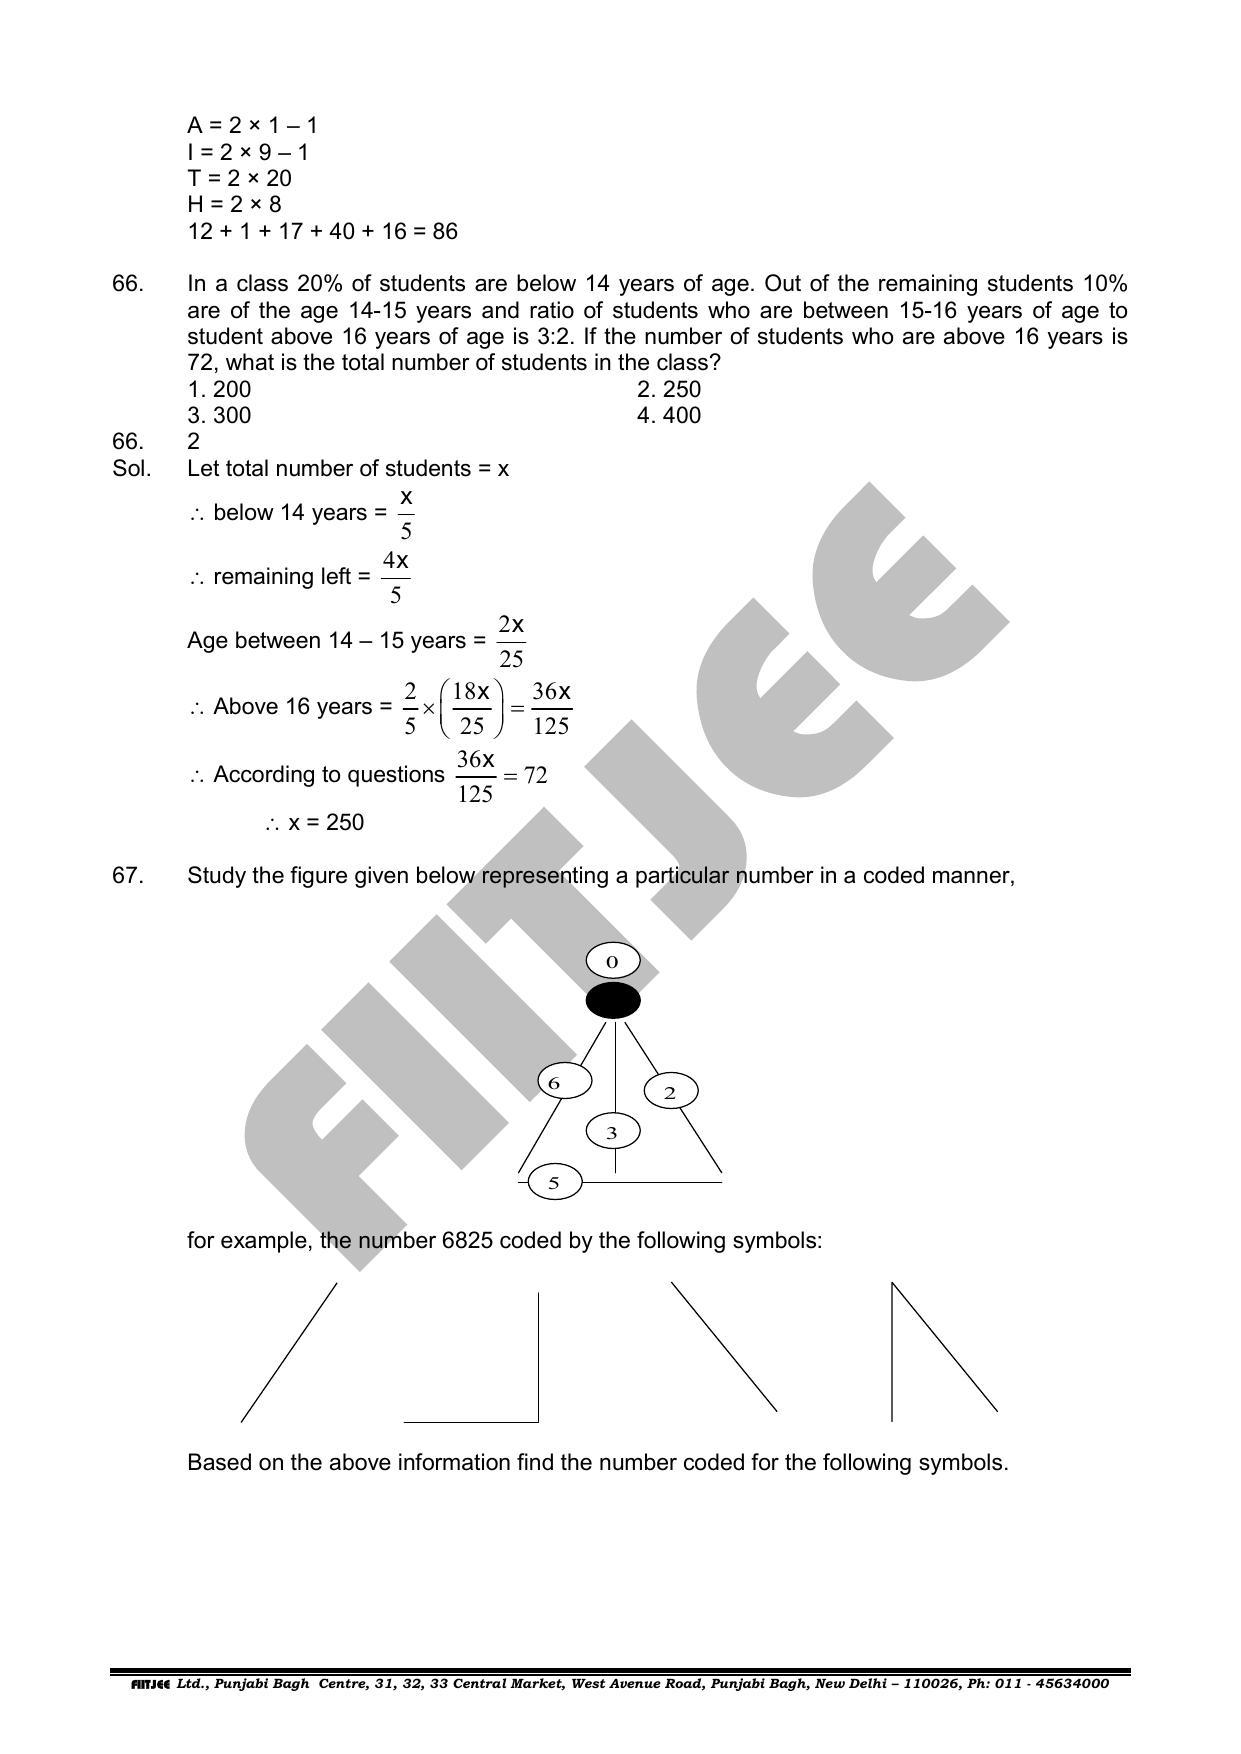 NTSE 2019 (Stage II) MAT Question Paper with Solution (June 16, 2019) - Page 21